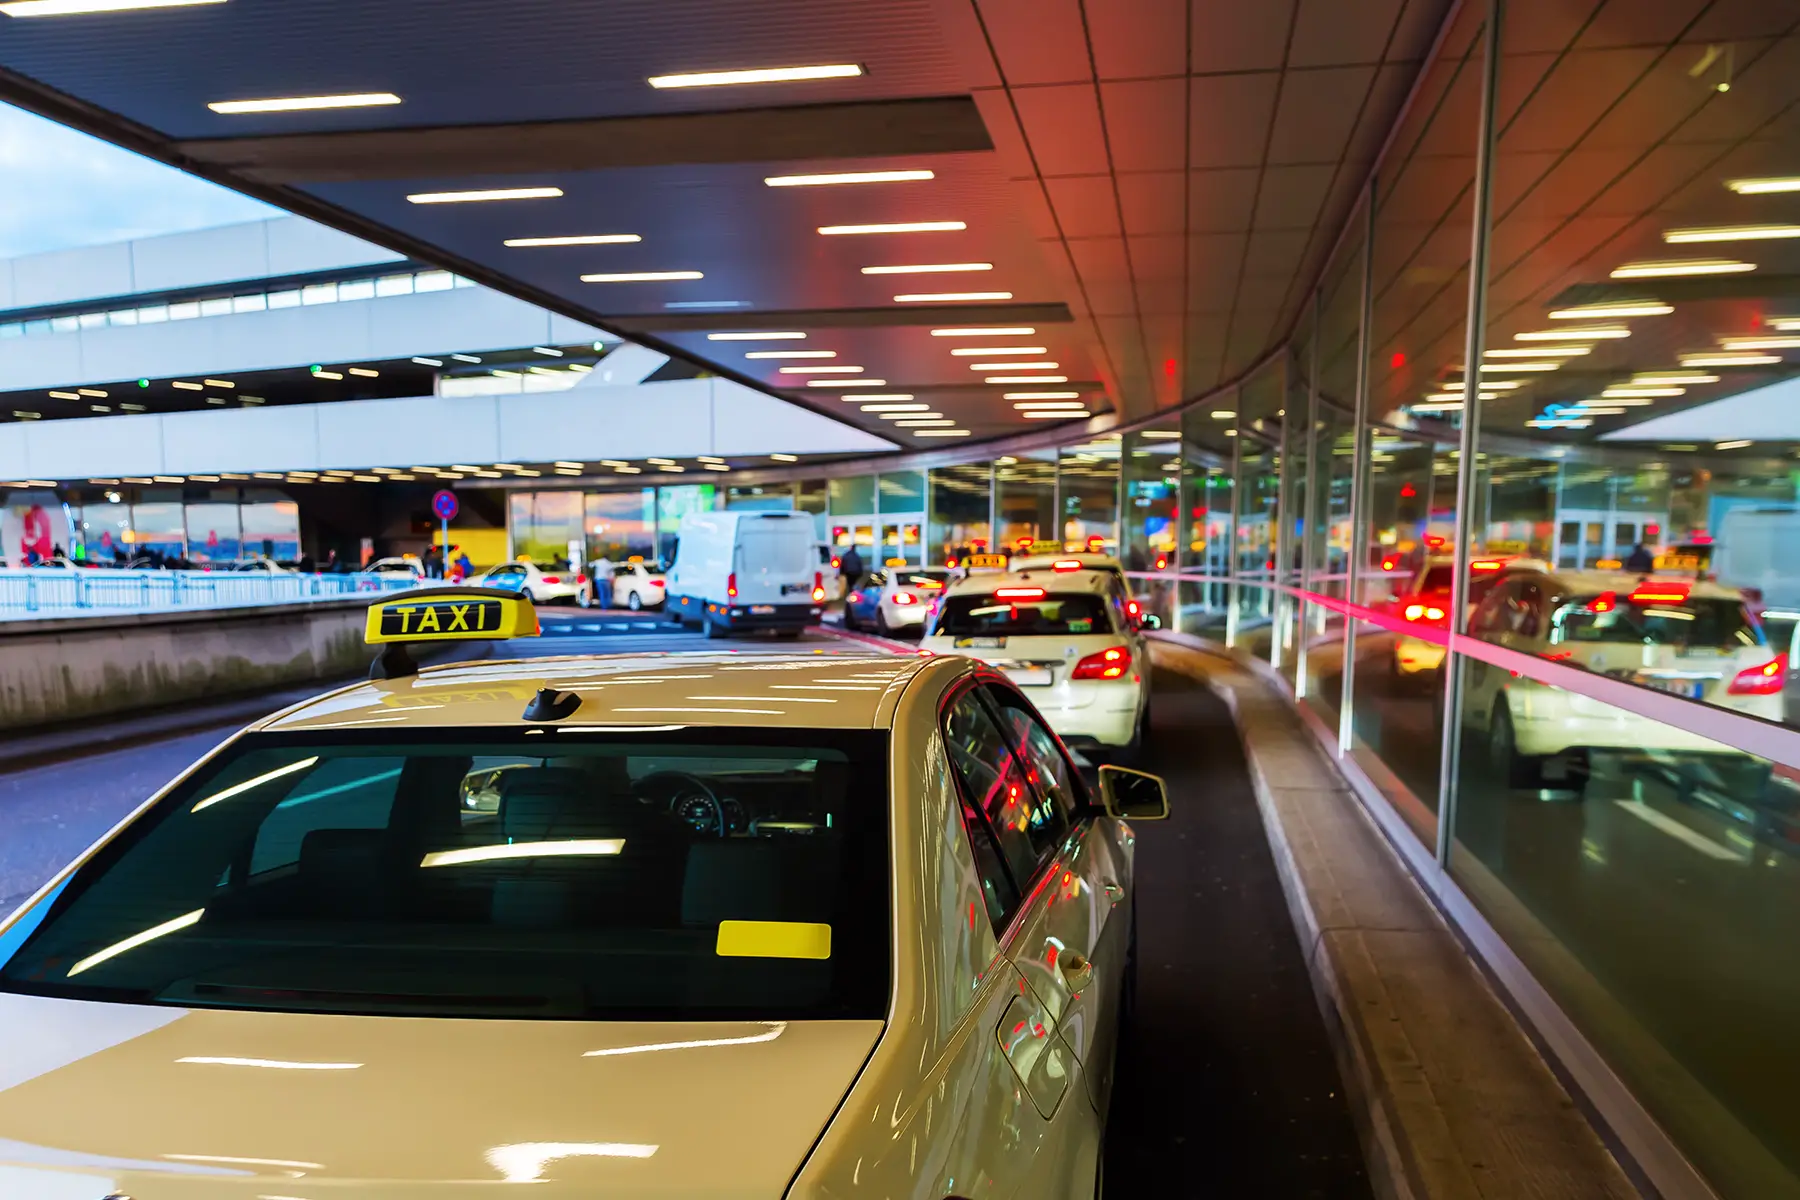 Taxi cabs at Cologne Airport